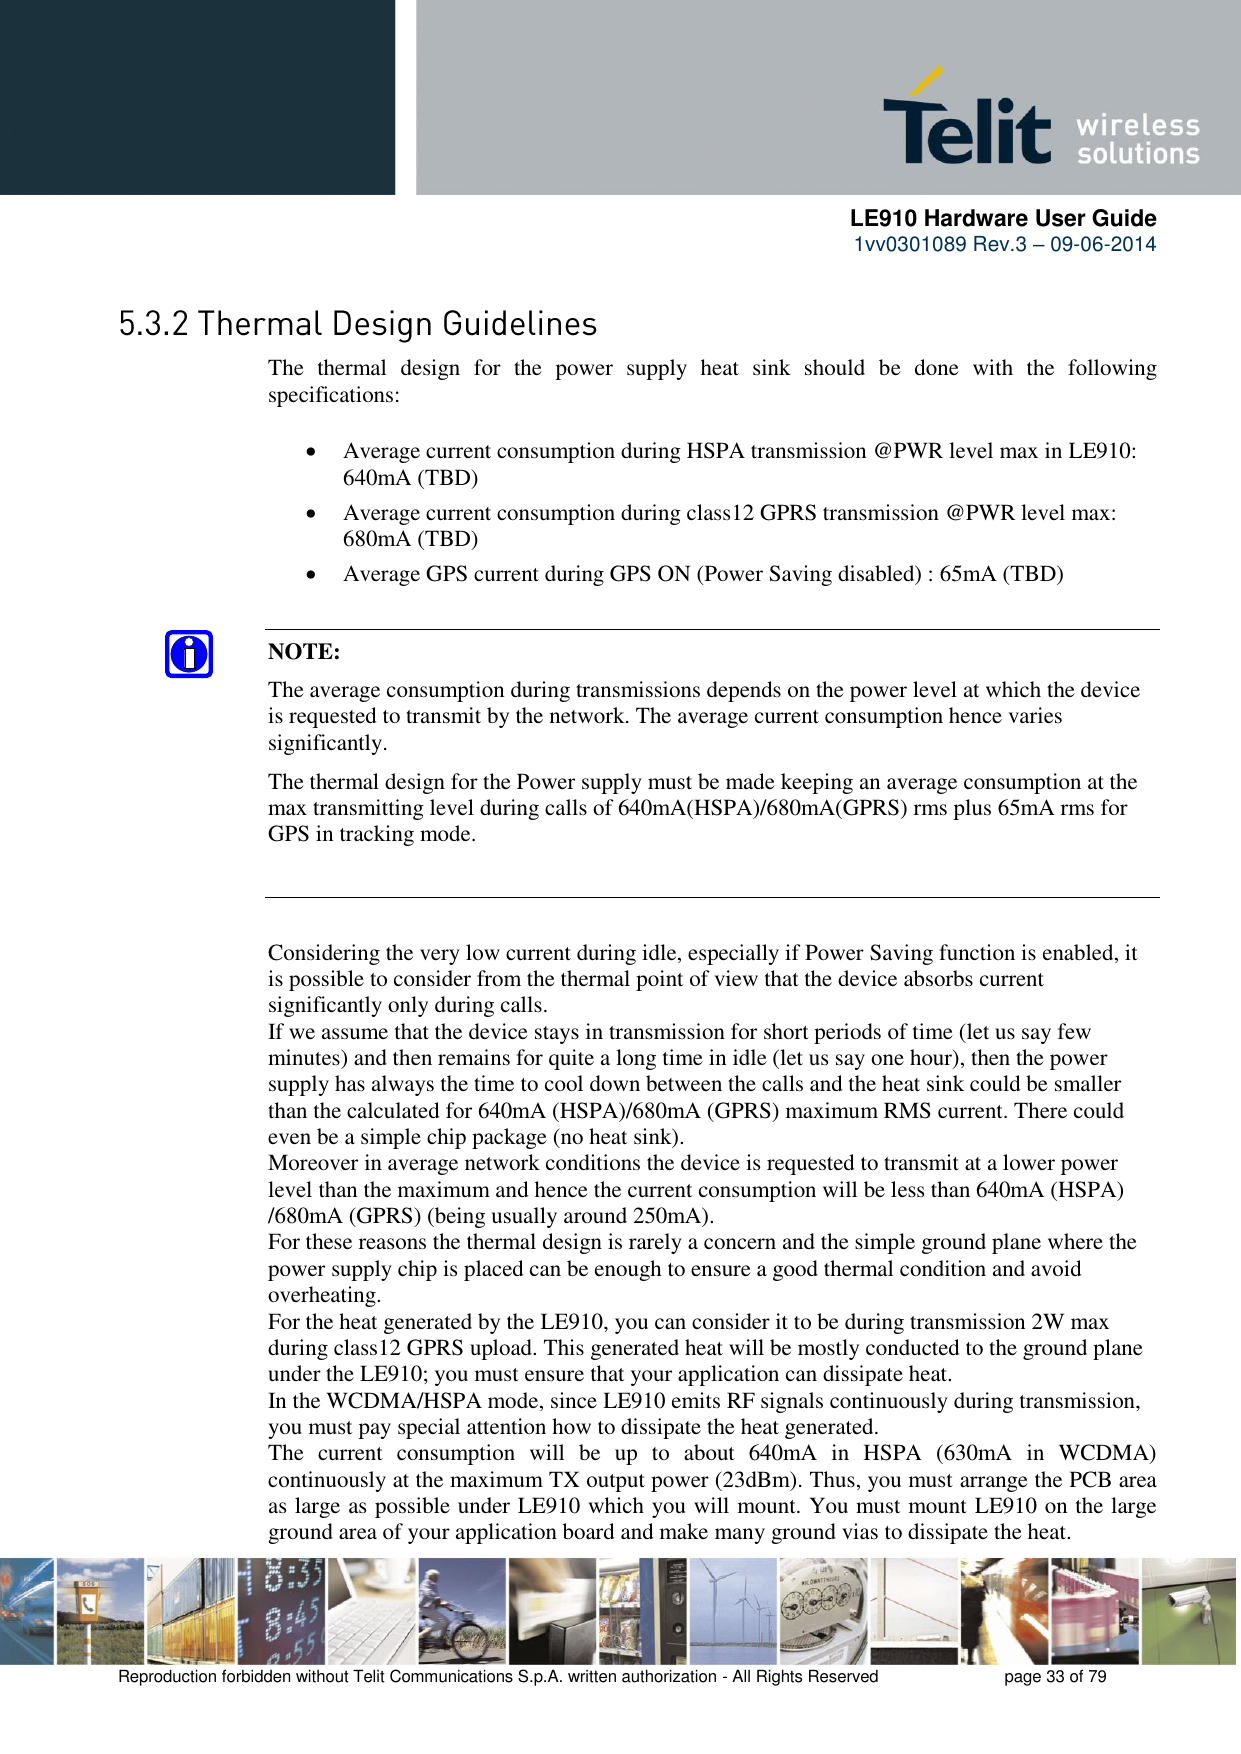      LE910 Hardware User Guide 1vv0301089 Rev.3 – 09-06-2014    Reproduction forbidden without Telit Communications S.p.A. written authorization - All Rights Reserved    page 33 of 79   The  thermal  design  for  the  power  supply  heat  sink  should  be  done  with  the  following specifications:   Average current consumption during HSPA transmission @PWR level max in LE910: 640mA (TBD)   Average current consumption during class12 GPRS transmission @PWR level max: 680mA (TBD)   Average GPS current during GPS ON (Power Saving disabled) : 65mA (TBD)  NOTE: The average consumption during transmissions depends on the power level at which the device is requested to transmit by the network. The average current consumption hence varies significantly.  The thermal design for the Power supply must be made keeping an average consumption at the max transmitting level during calls of 640mA(HSPA)/680mA(GPRS) rms plus 65mA rms for GPS in tracking mode. Considering the very low current during idle, especially if Power Saving function is enabled, it is possible to consider from the thermal point of view that the device absorbs current significantly only during calls.  If we assume that the device stays in transmission for short periods of time (let us say few minutes) and then remains for quite a long time in idle (let us say one hour), then the power supply has always the time to cool down between the calls and the heat sink could be smaller than the calculated for 640mA (HSPA)/680mA (GPRS) maximum RMS current. There could even be a simple chip package (no heat sink).  Moreover in average network conditions the device is requested to transmit at a lower power level than the maximum and hence the current consumption will be less than 640mA (HSPA) /680mA (GPRS) (being usually around 250mA).  For these reasons the thermal design is rarely a concern and the simple ground plane where the power supply chip is placed can be enough to ensure a good thermal condition and avoid overheating.  For the heat generated by the LE910, you can consider it to be during transmission 2W max during class12 GPRS upload. This generated heat will be mostly conducted to the ground plane under the LE910; you must ensure that your application can dissipate heat.  In the WCDMA/HSPA mode, since LE910 emits RF signals continuously during transmission, you must pay special attention how to dissipate the heat generated.  The  current  consumption  will  be  up  to  about  640mA  in  HSPA  (630mA  in  WCDMA) continuously at the maximum TX output power (23dBm). Thus, you must arrange the PCB area as large as possible under LE910 which you will mount. You must mount LE910 on the large ground area of your application board and make many ground vias to dissipate the heat. 